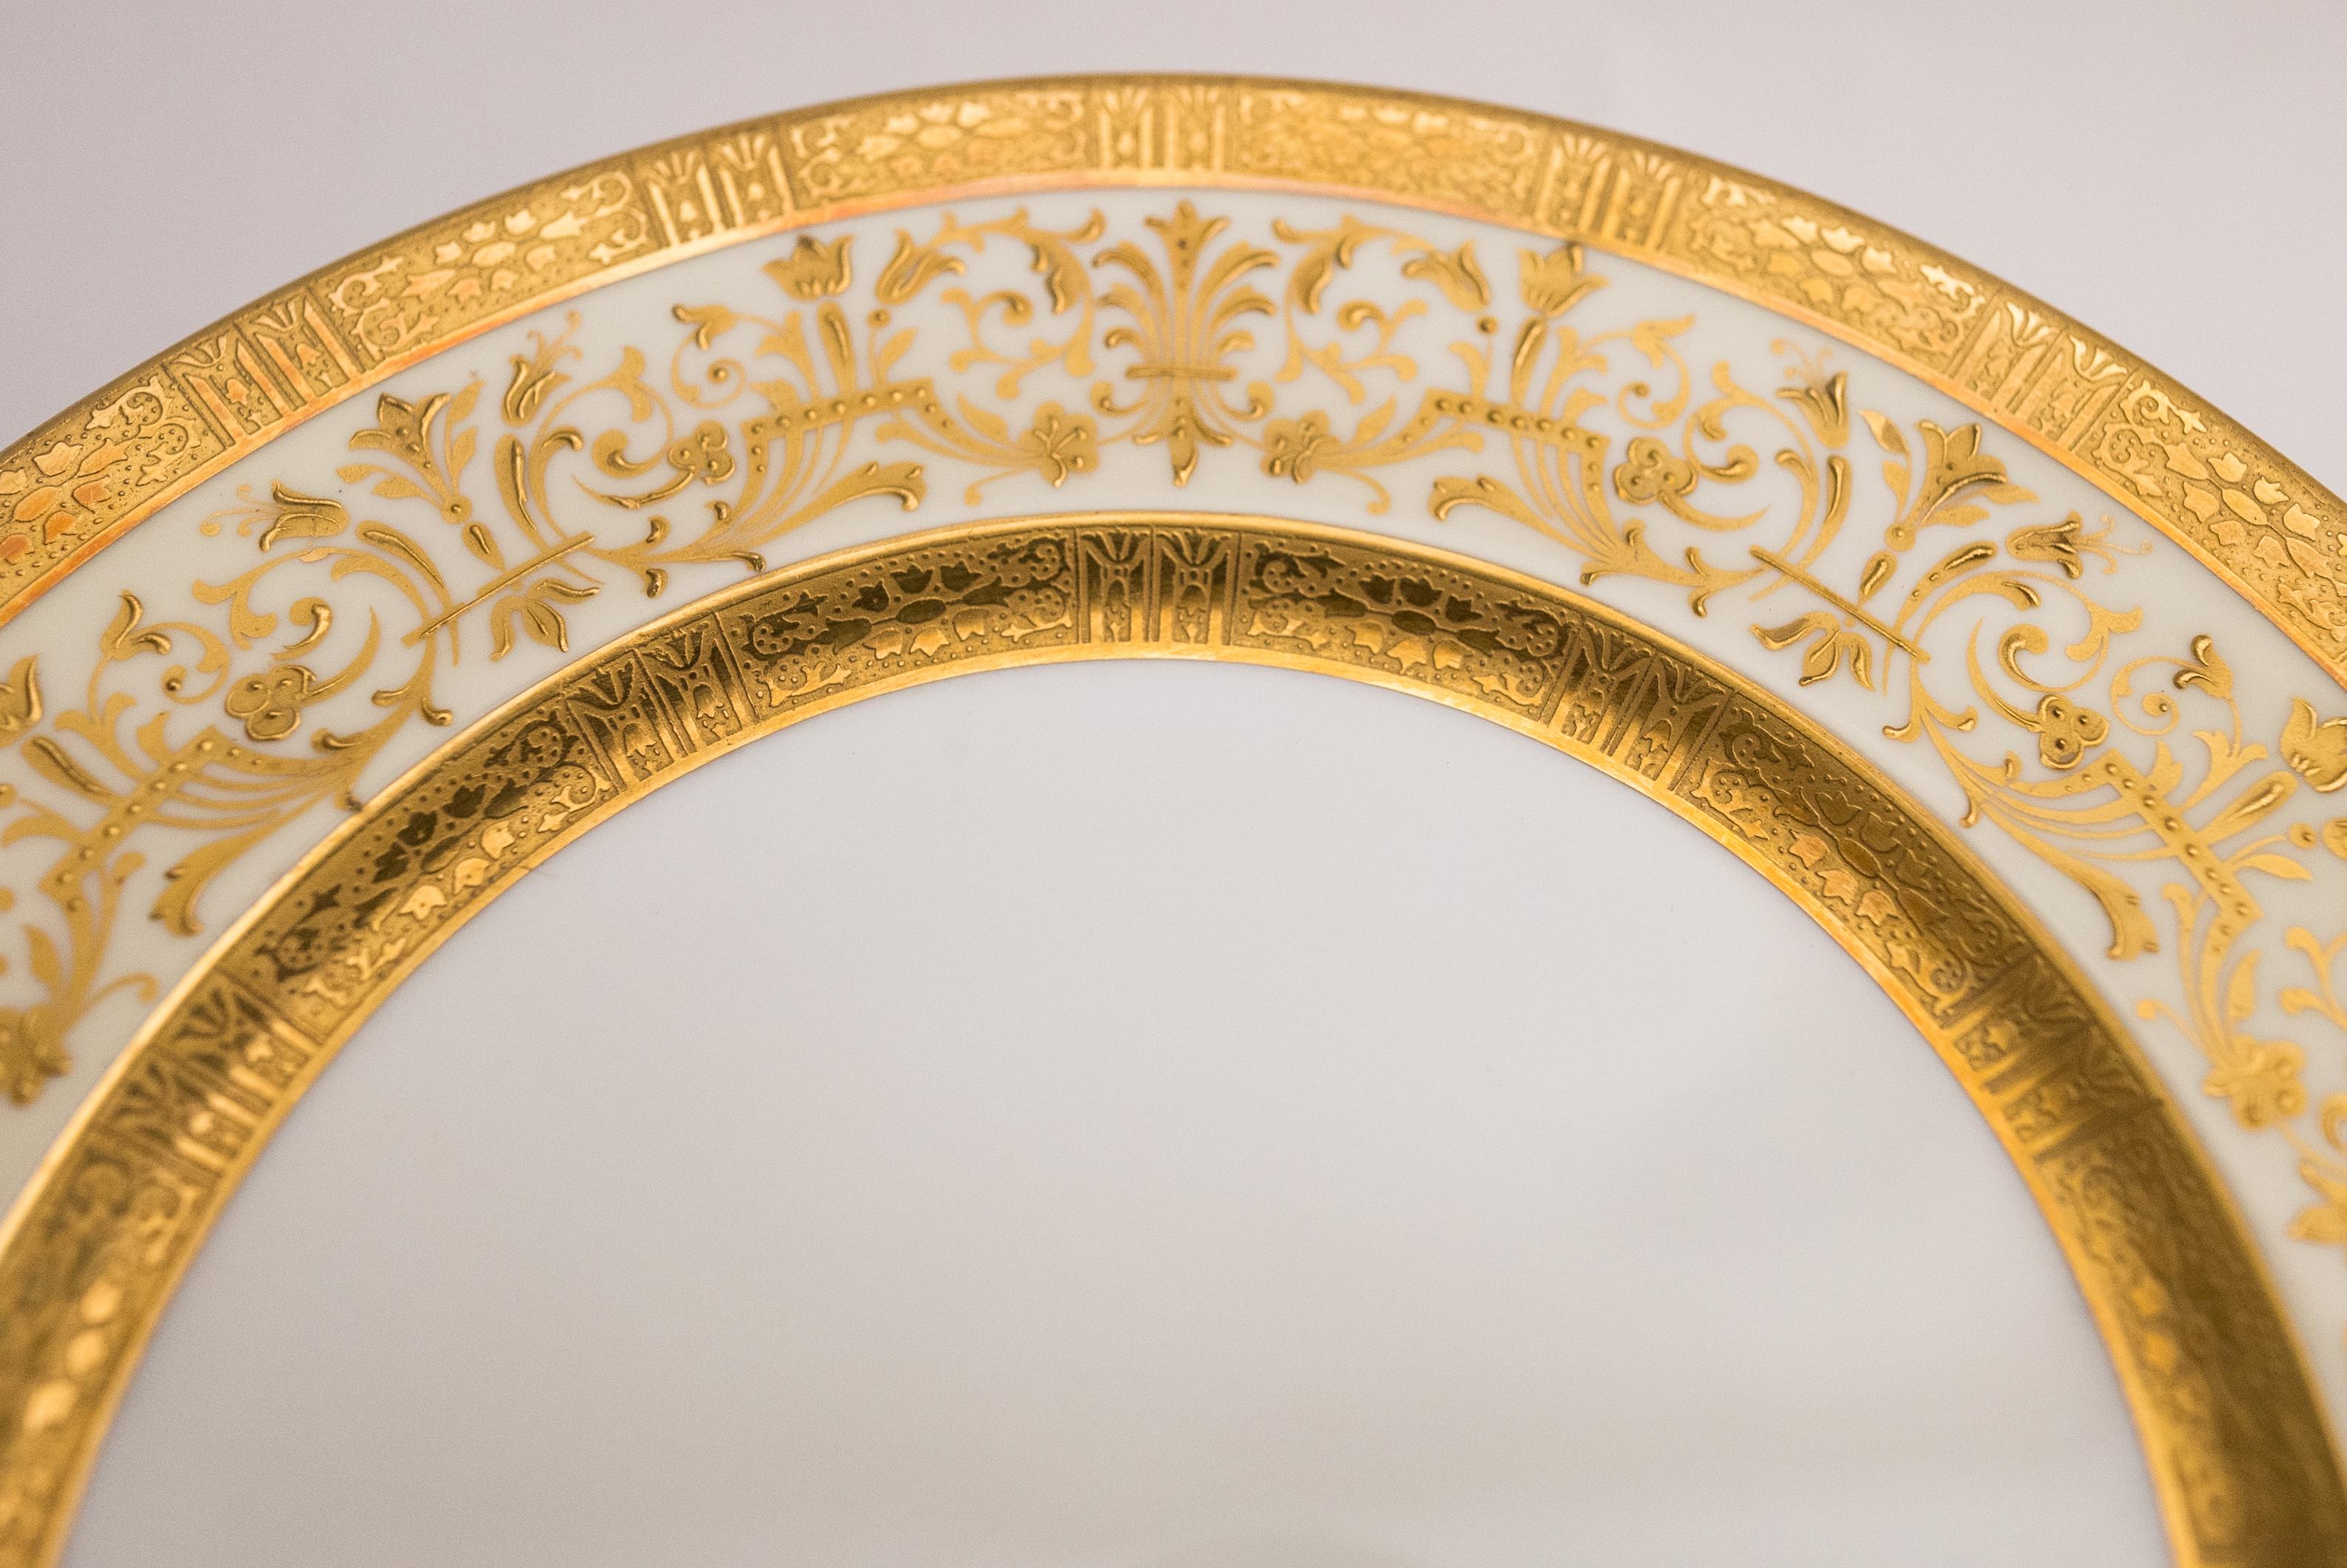 An elaborate raised paste gilt collar with double acid etched 24 karat gold bands from the re known Gilded Age porcelain manufacturer Cauldon, England. This suite of 12 plates were custom ordered through the fine retailer John Wanamaker New York. In